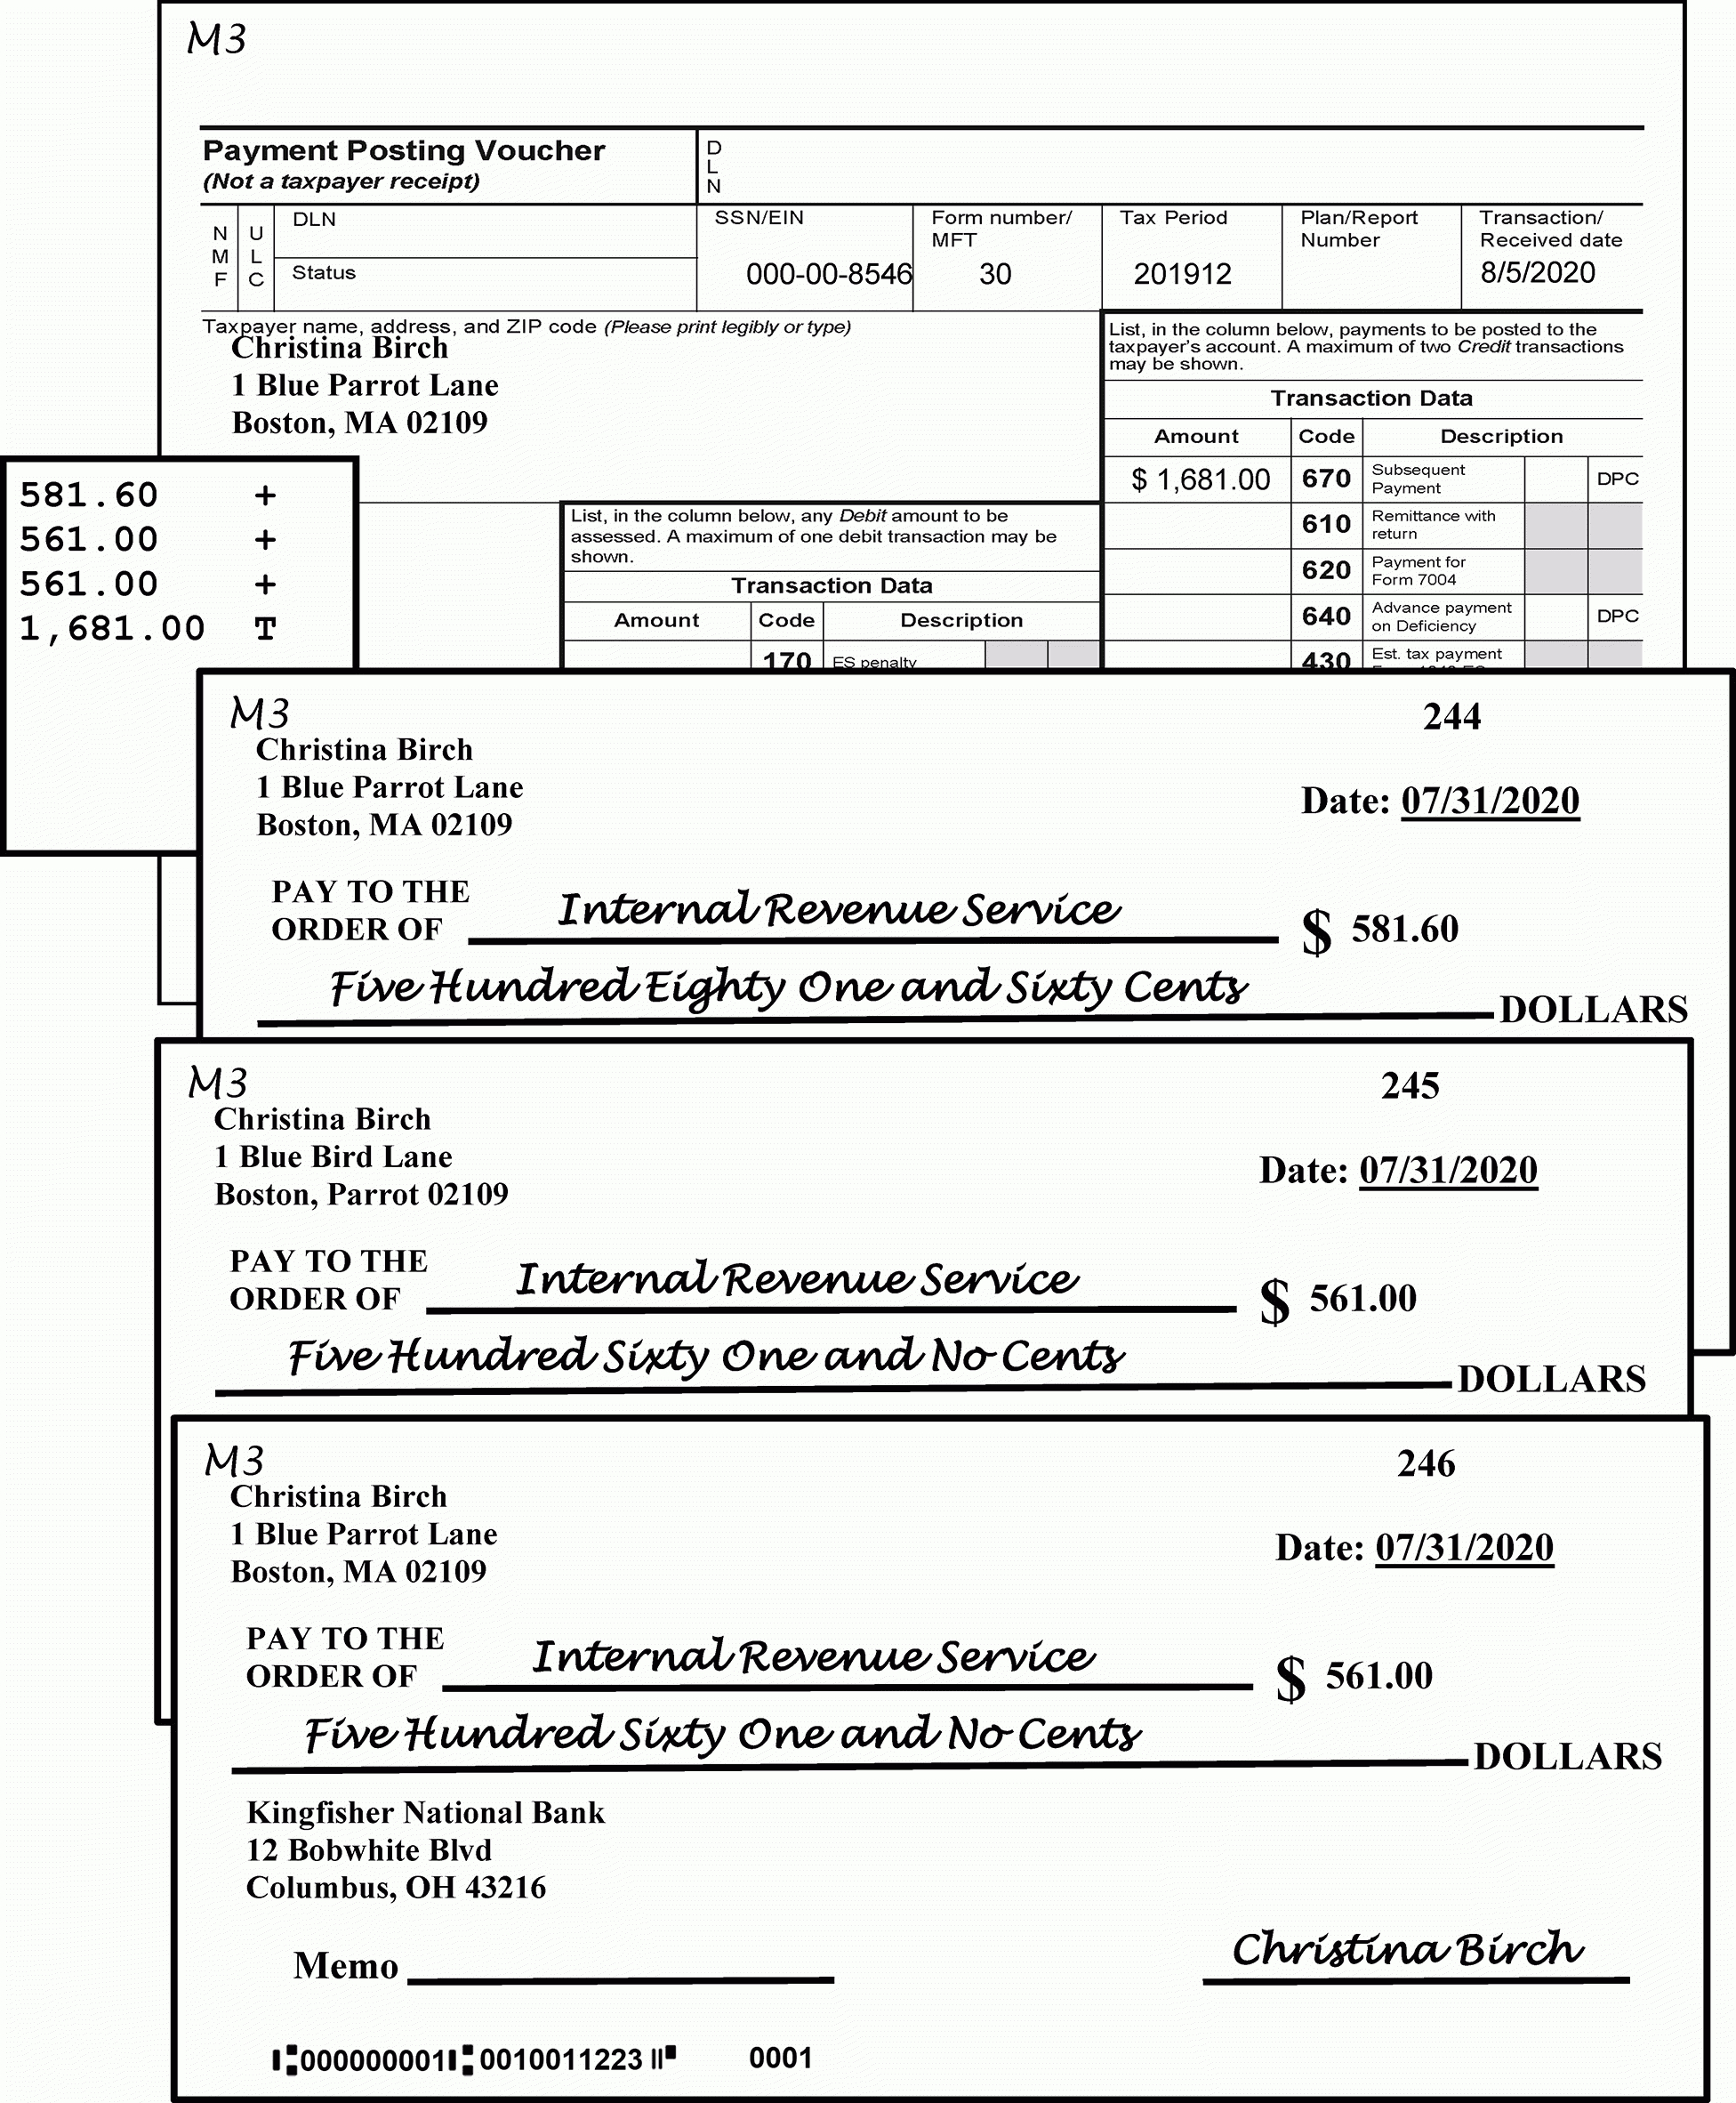 3.8.45 Manual Deposit Process | Internal Revenue Service Throughout Dd Form 2501 Courier Authorization Card Template